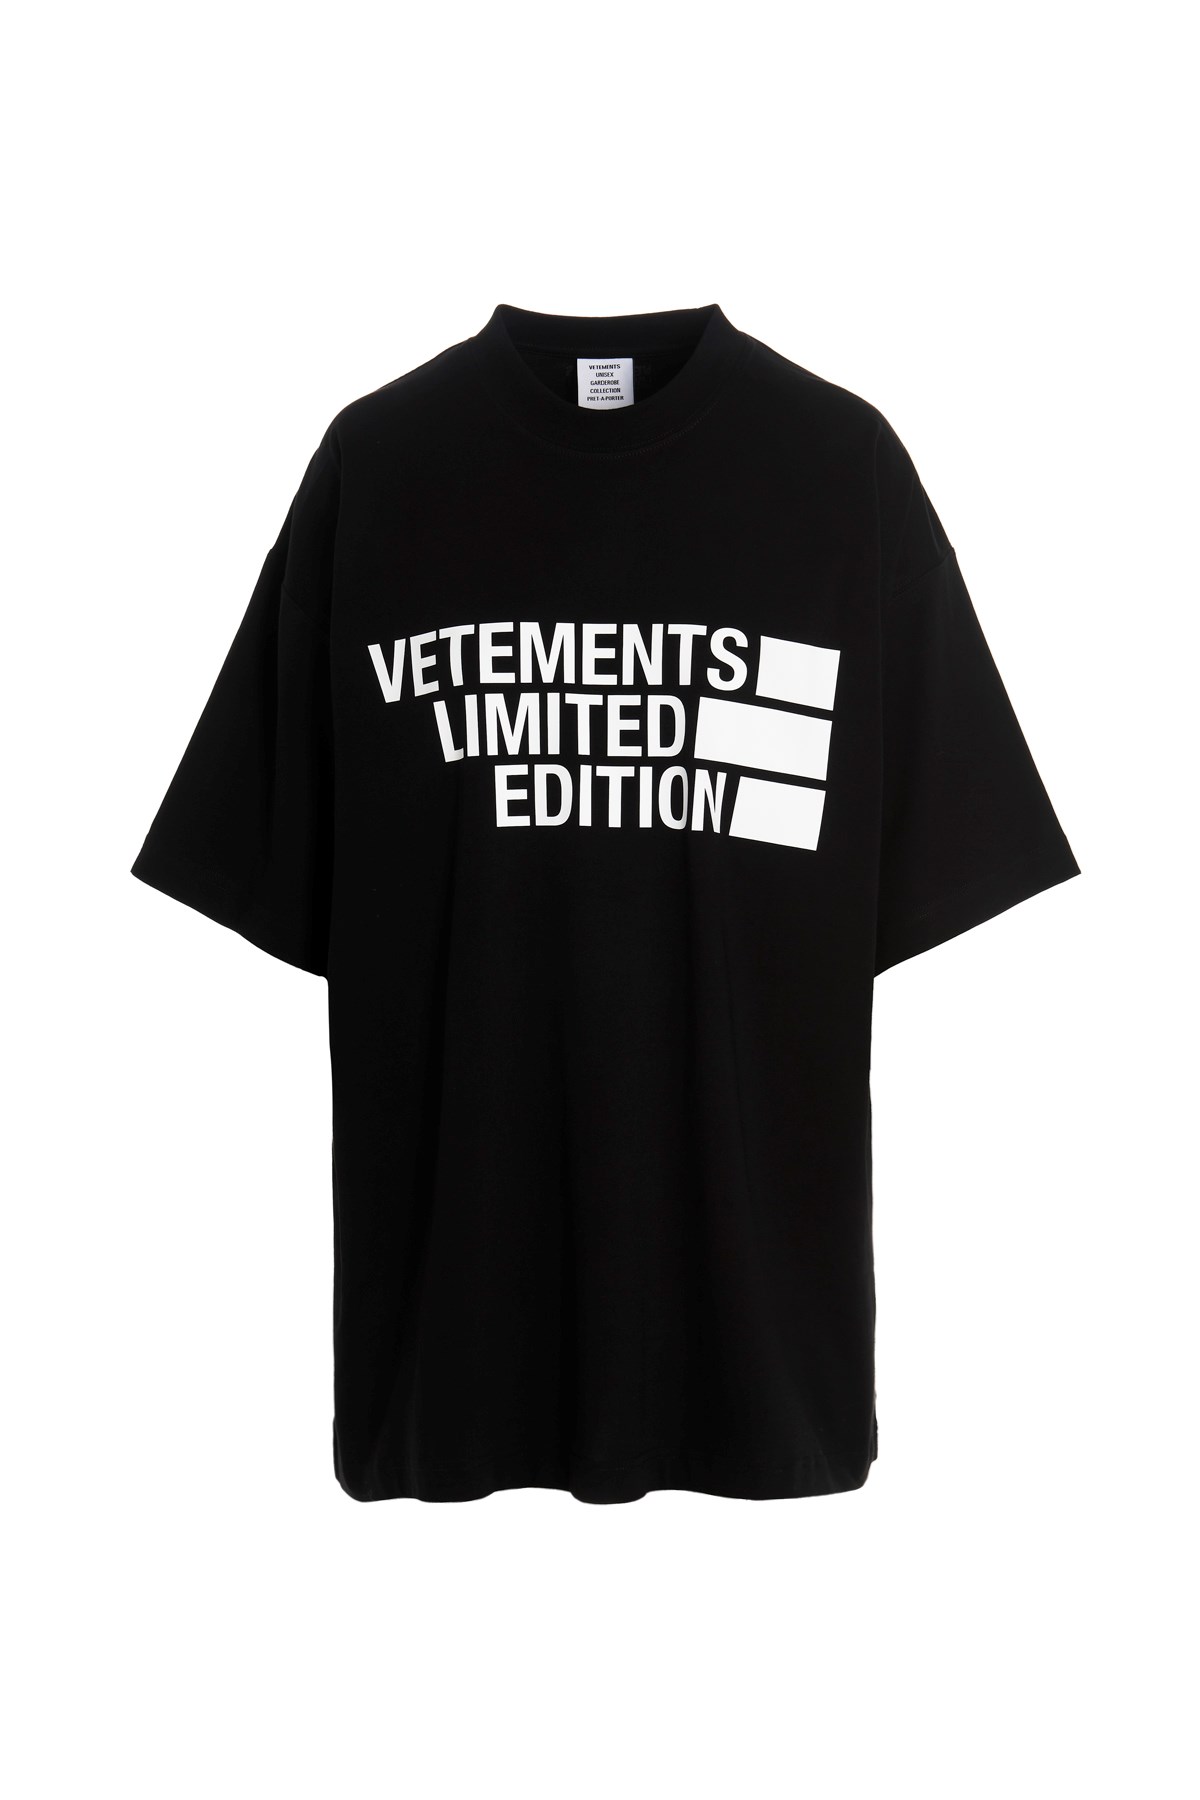 VETEMENTS T-Shirt 'Limited Edition'